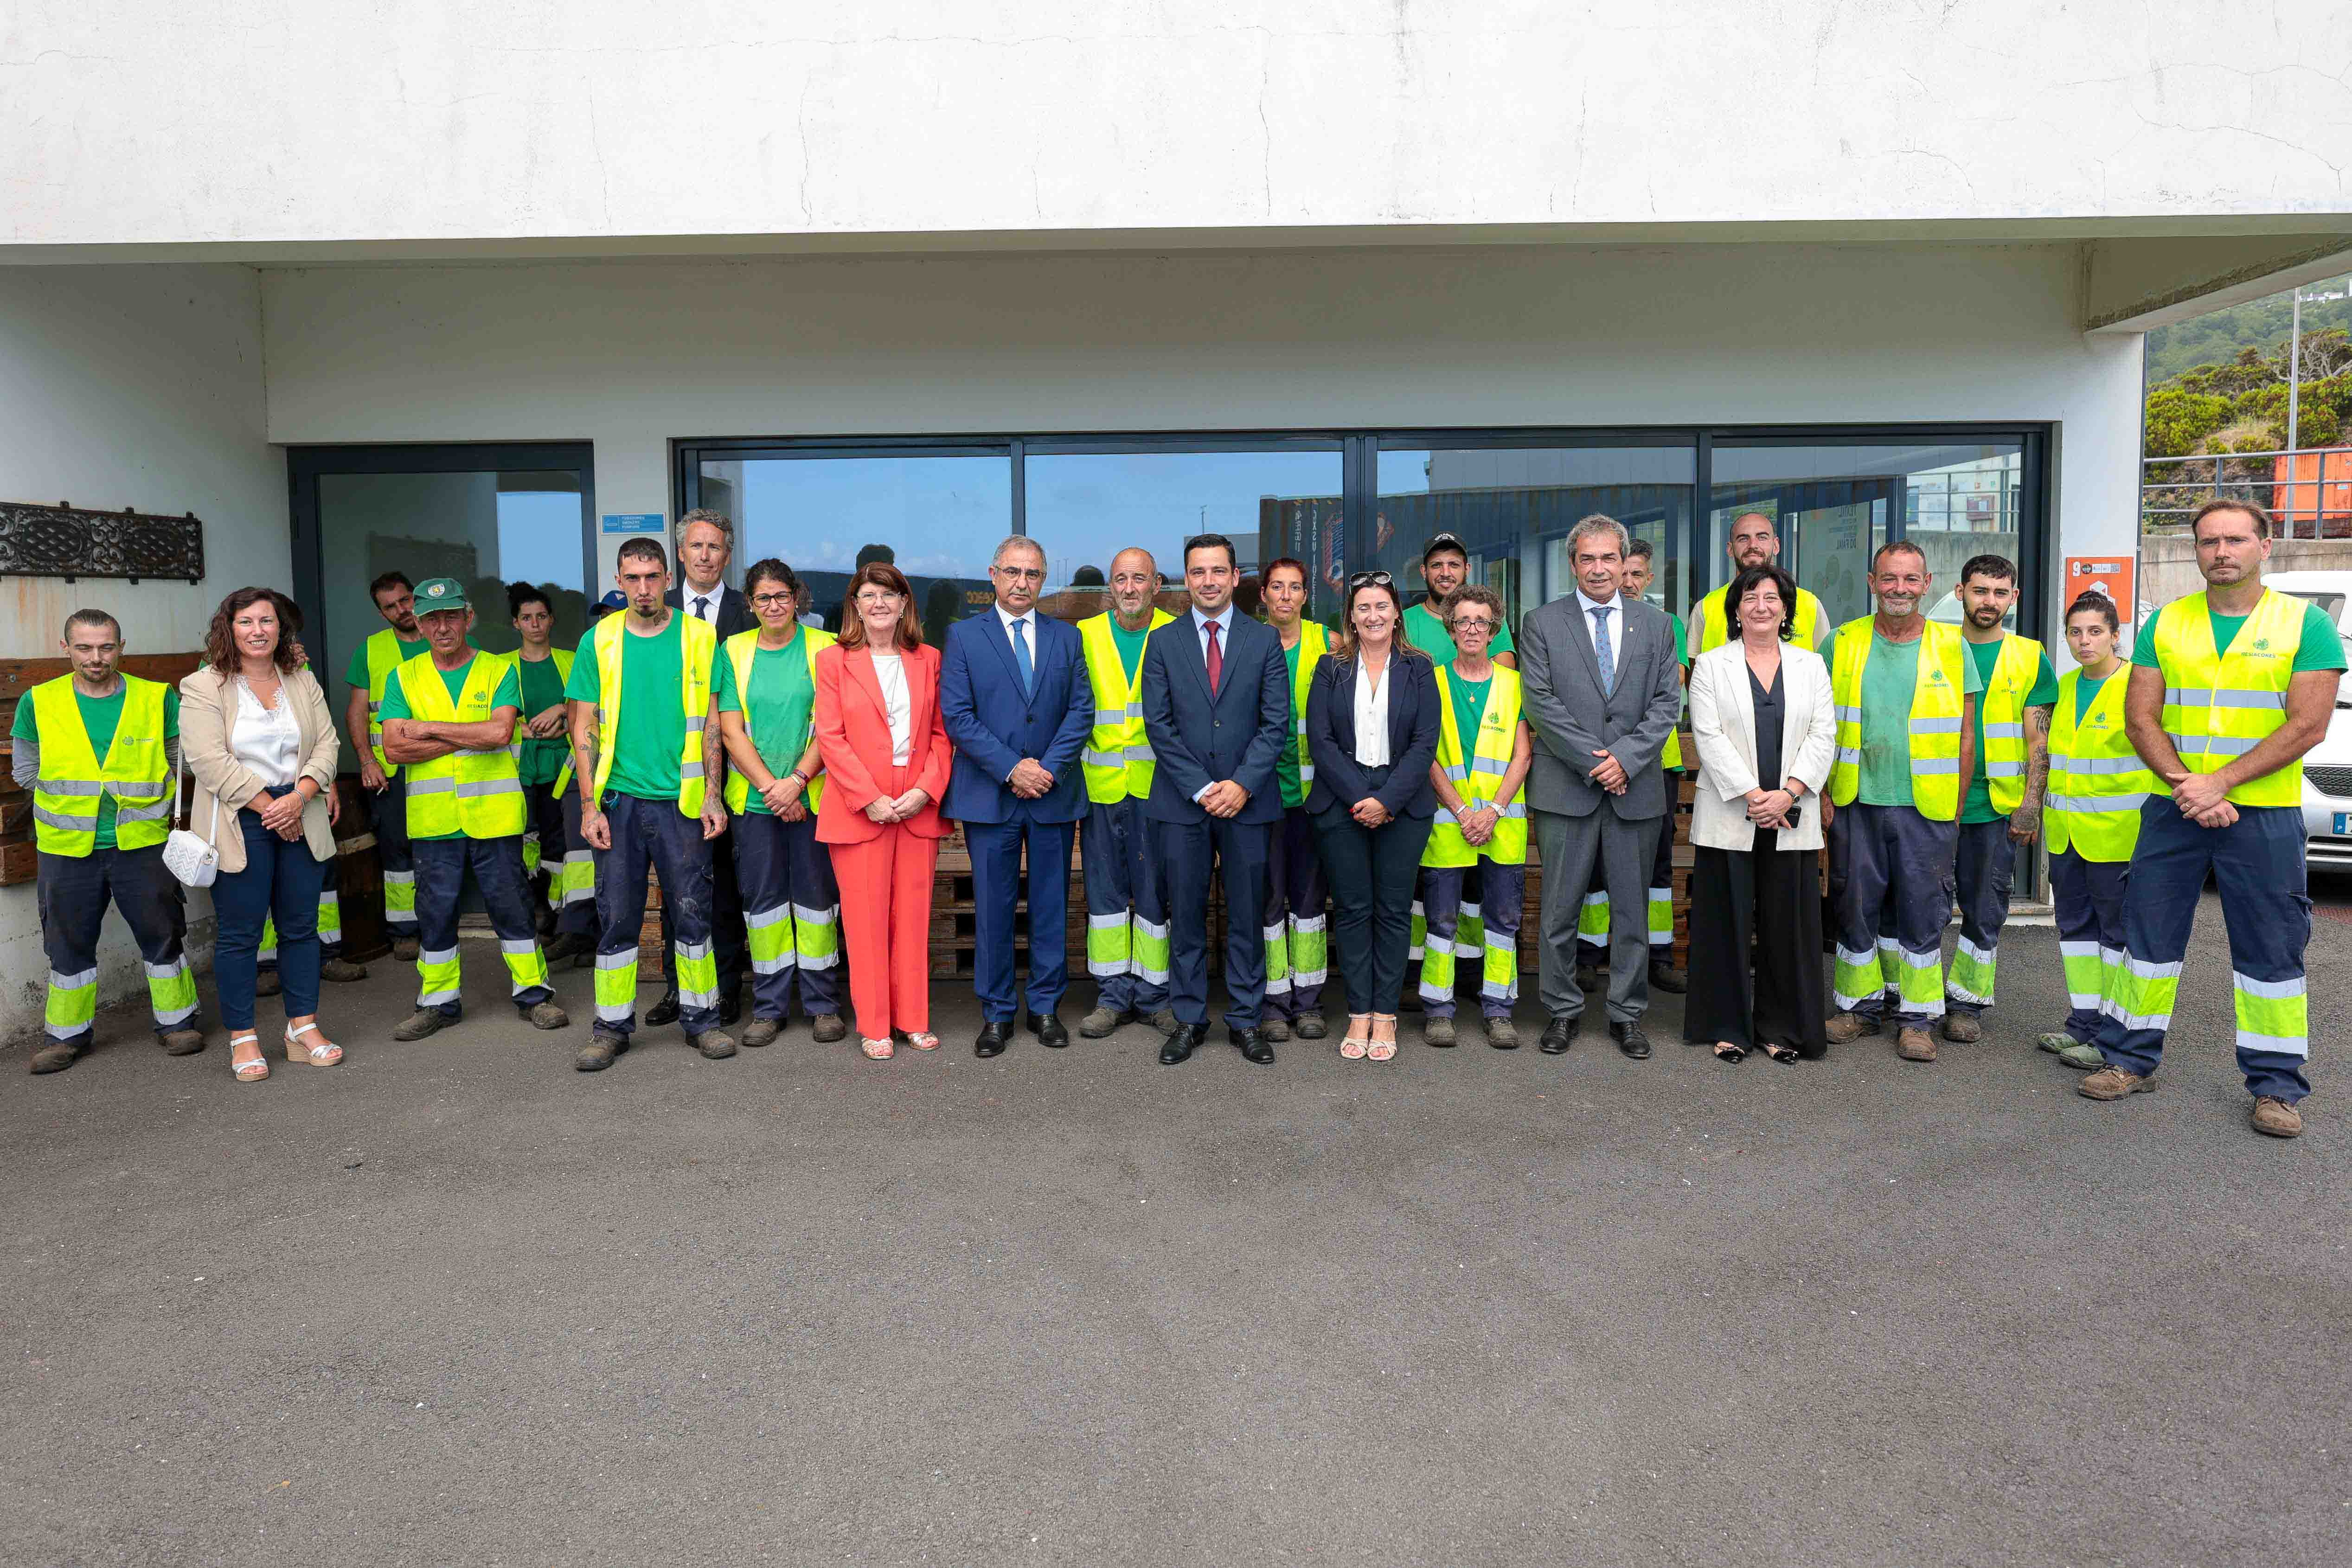 Regional Government investment improves waste management capabilities on Faial Island, highlights José Manuel Bolieiro